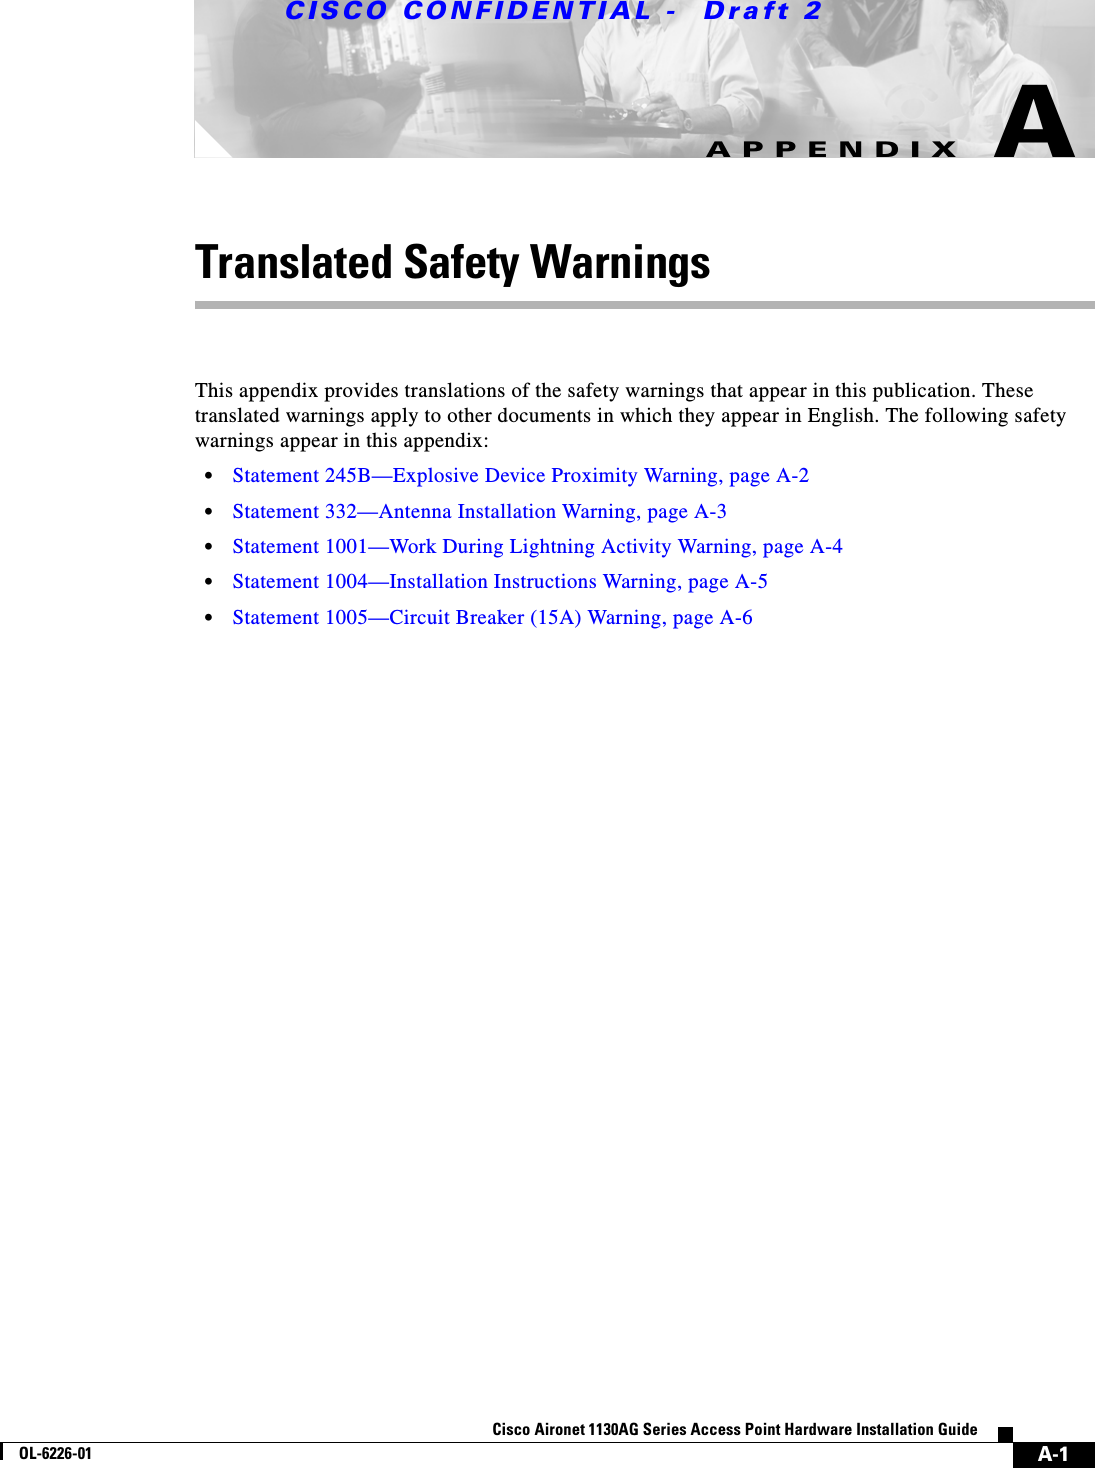  CISCO CONFIDENTIAL -  Draft 2A-1Cisco Aironet 1130AG Series Access Point Hardware Installation GuideOL-6226-01APPENDIXATranslated Safety WarningsThis appendix provides translations of the safety warnings that appear in this publication. These translated warnings apply to other documents in which they appear in English. The following safety warnings appear in this appendix:•Statement 245B—Explosive Device Proximity Warning, page A-2•Statement 332—Antenna Installation Warning, page A-3•Statement 1001—Work During Lightning Activity Warning, page A-4•Statement 1004—Installation Instructions Warning, page A-5•Statement 1005—Circuit Breaker (15A) Warning, page A-6